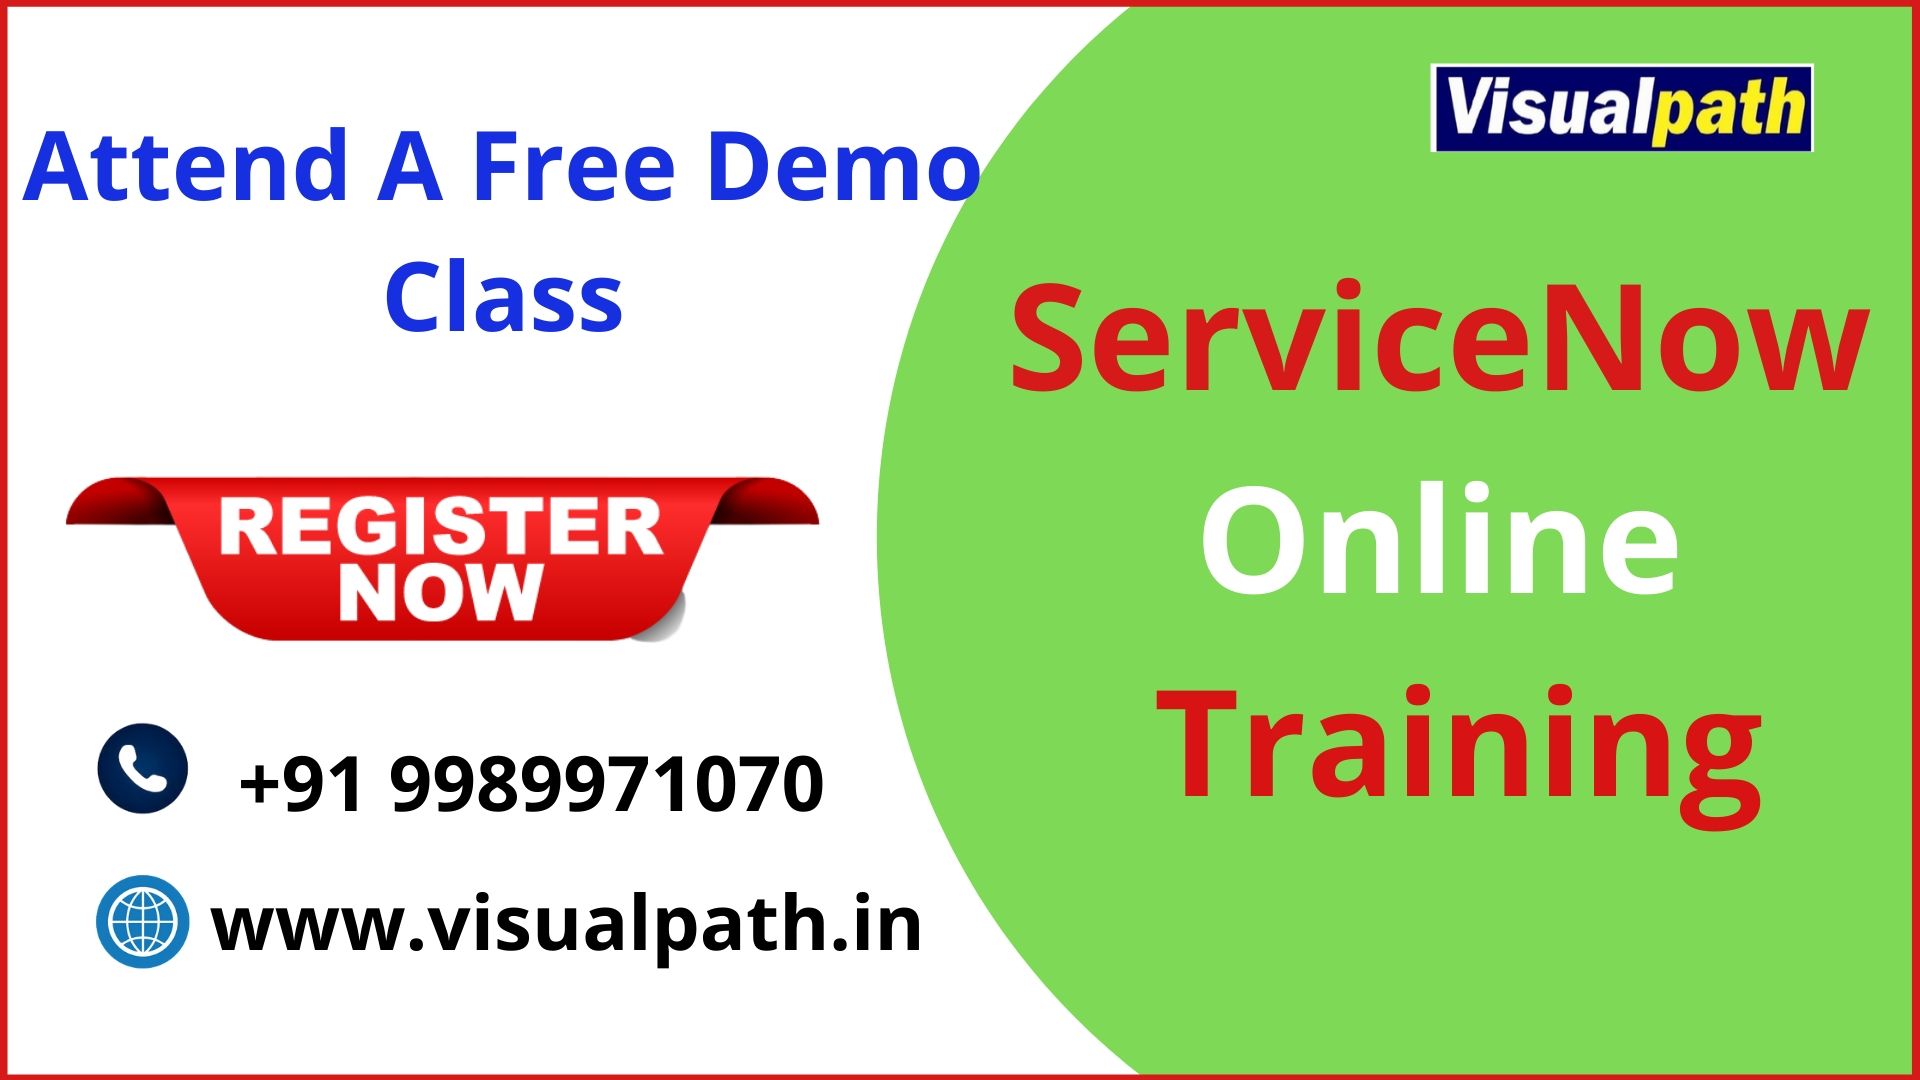 ServiceNow Online Training In Ameerpet, Hyderabad, Telangana, India